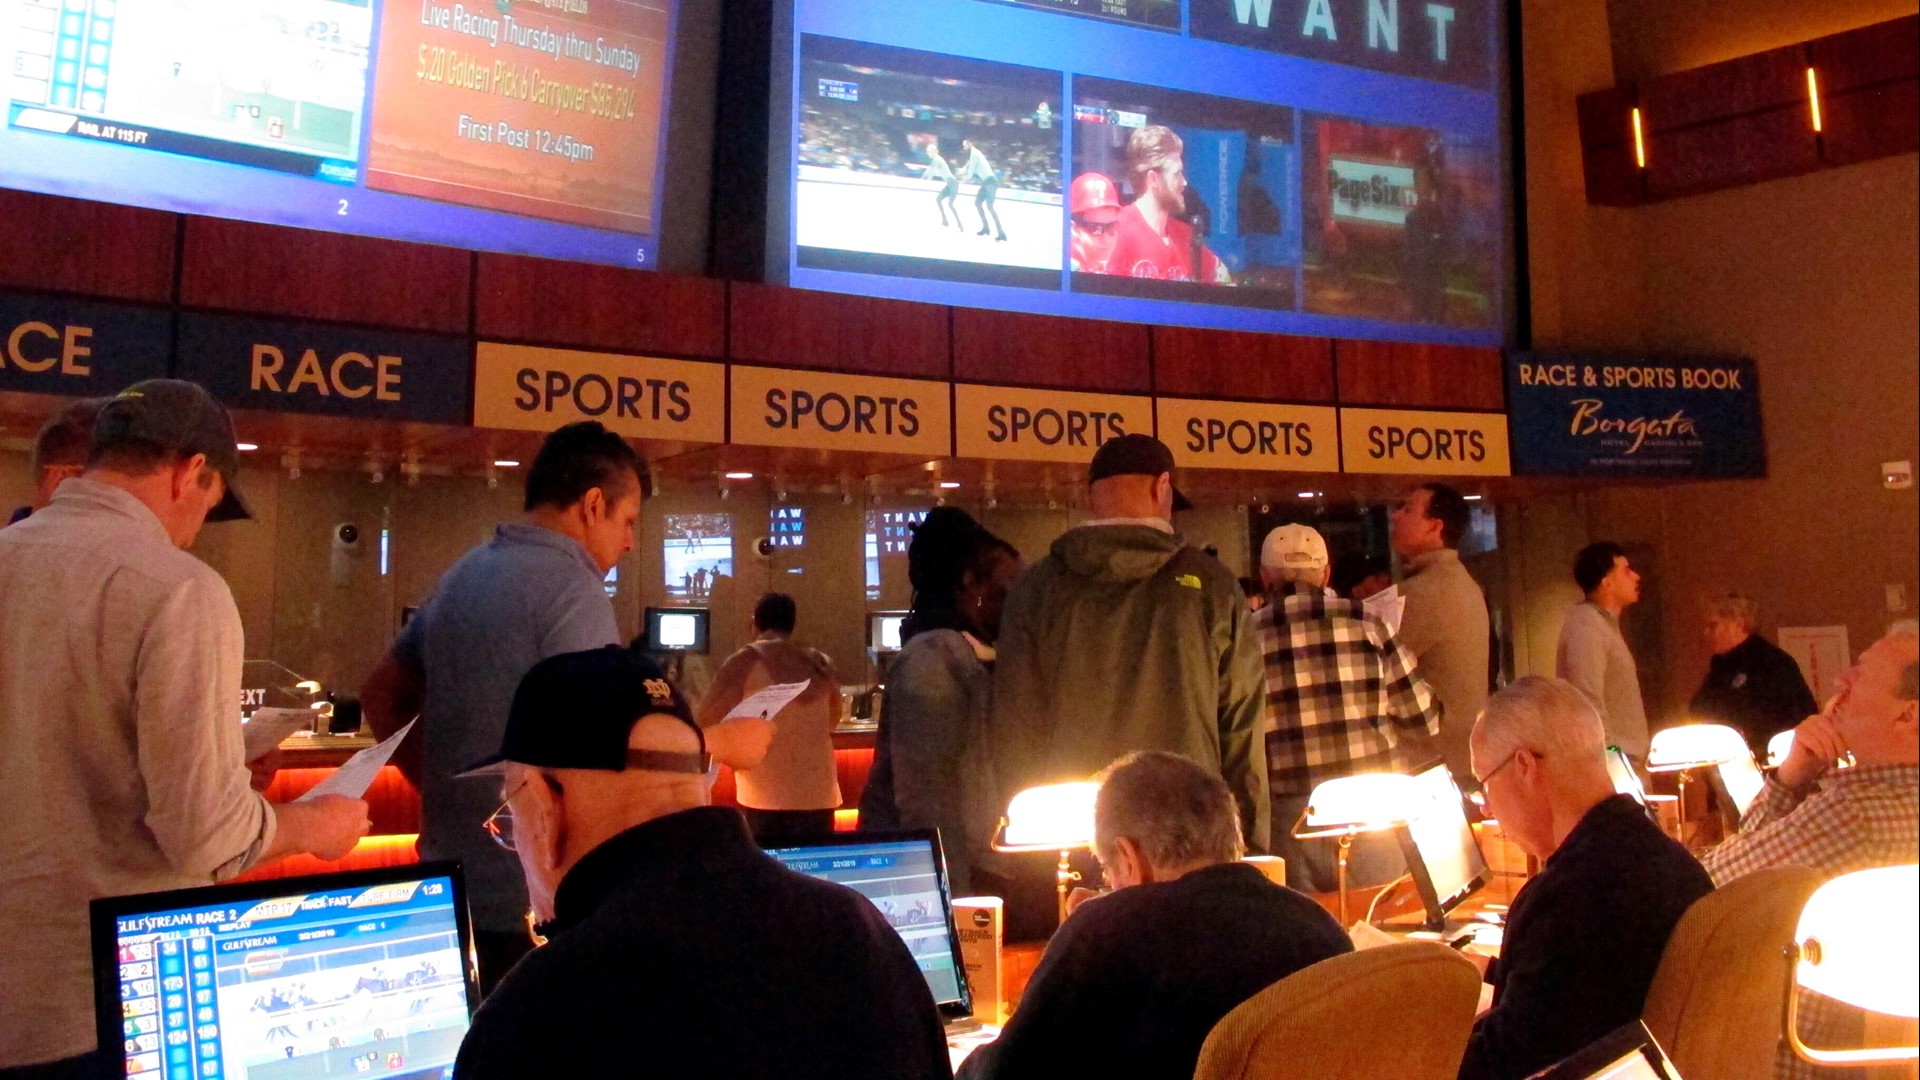 Six more states have legalized sports betting since last year's March Madness tournament.